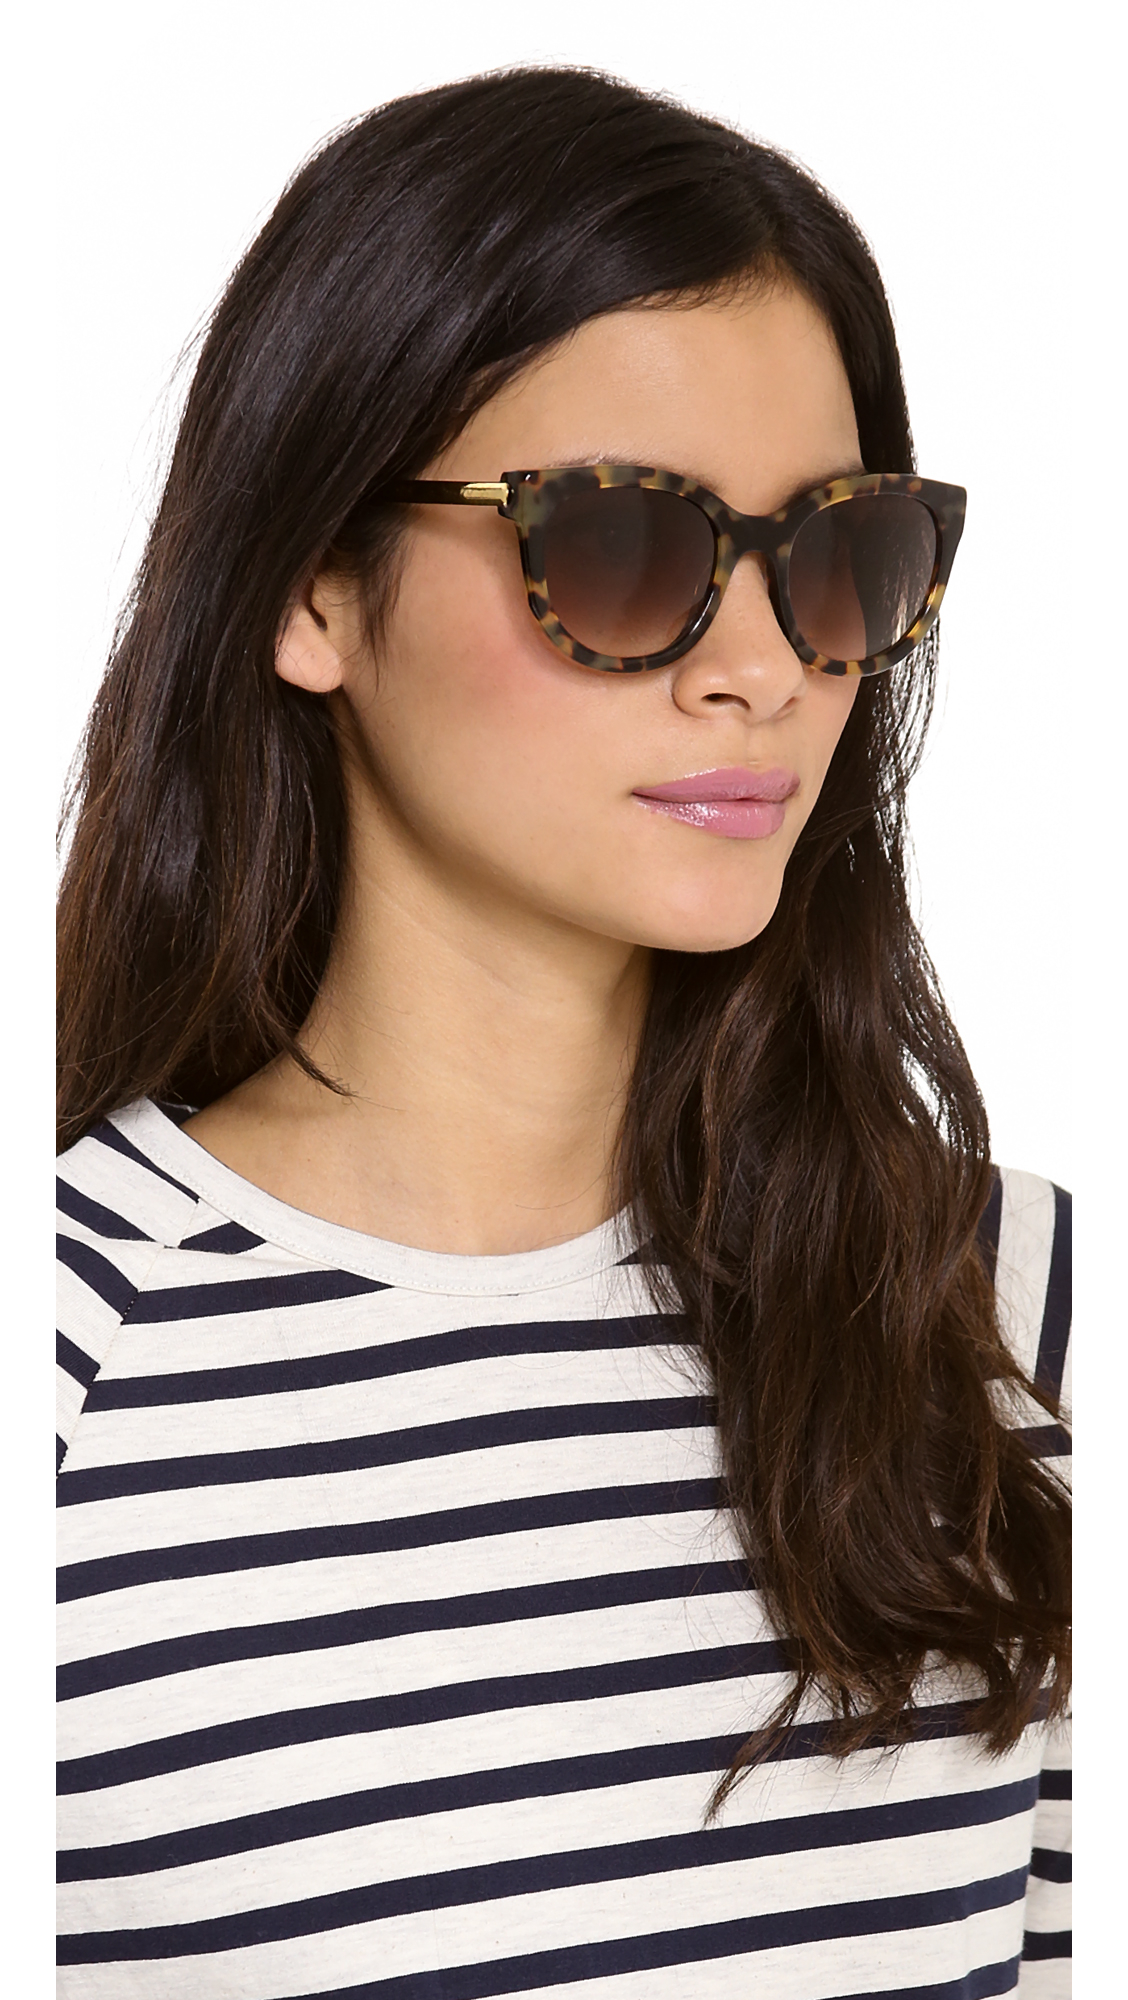 Lyst - Thierry lasry Lively Sunglasses in Brown